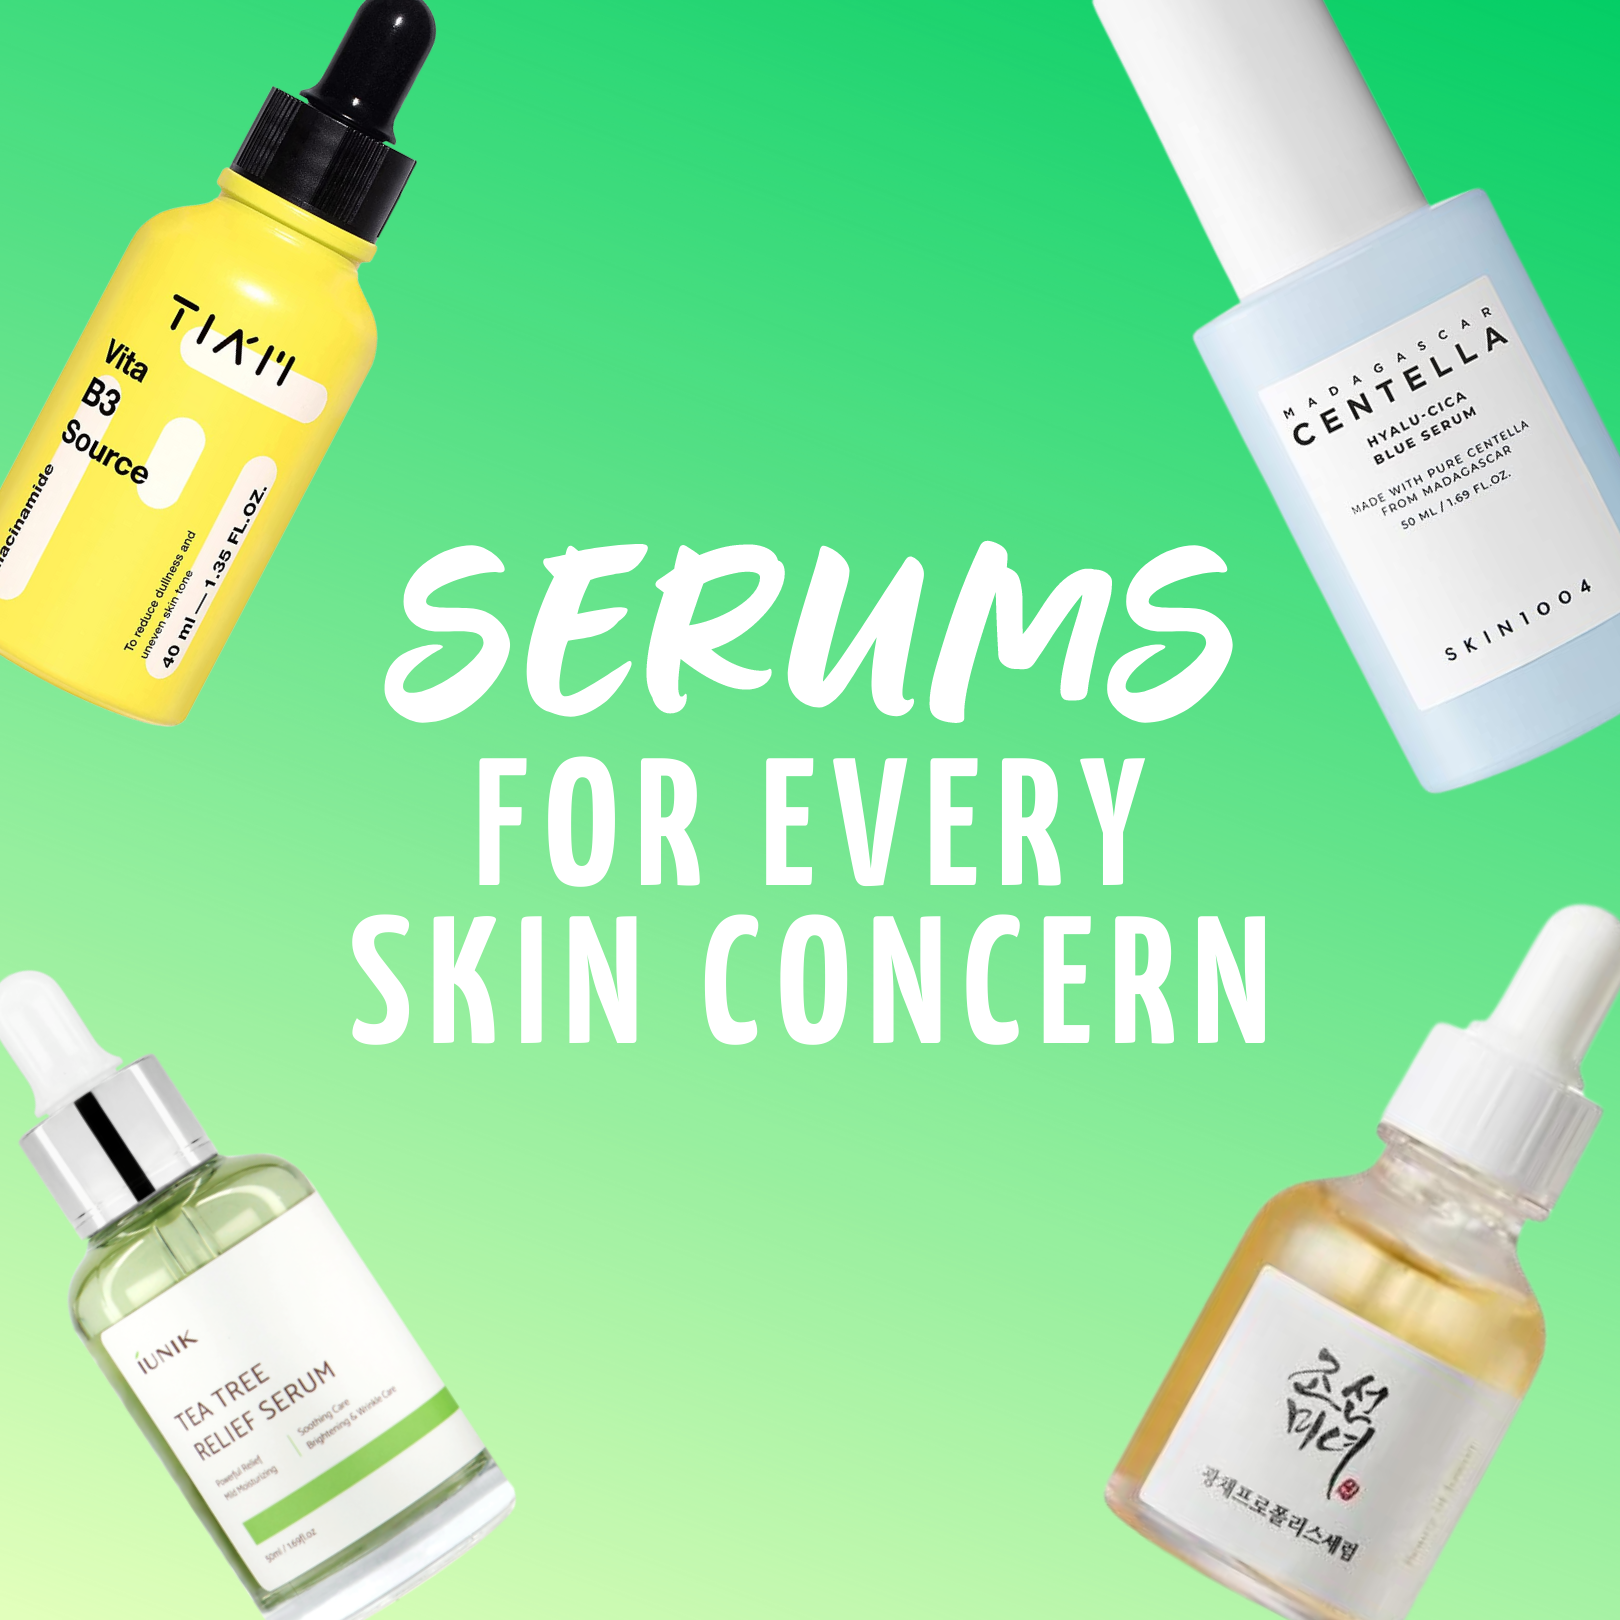 Serums For All!